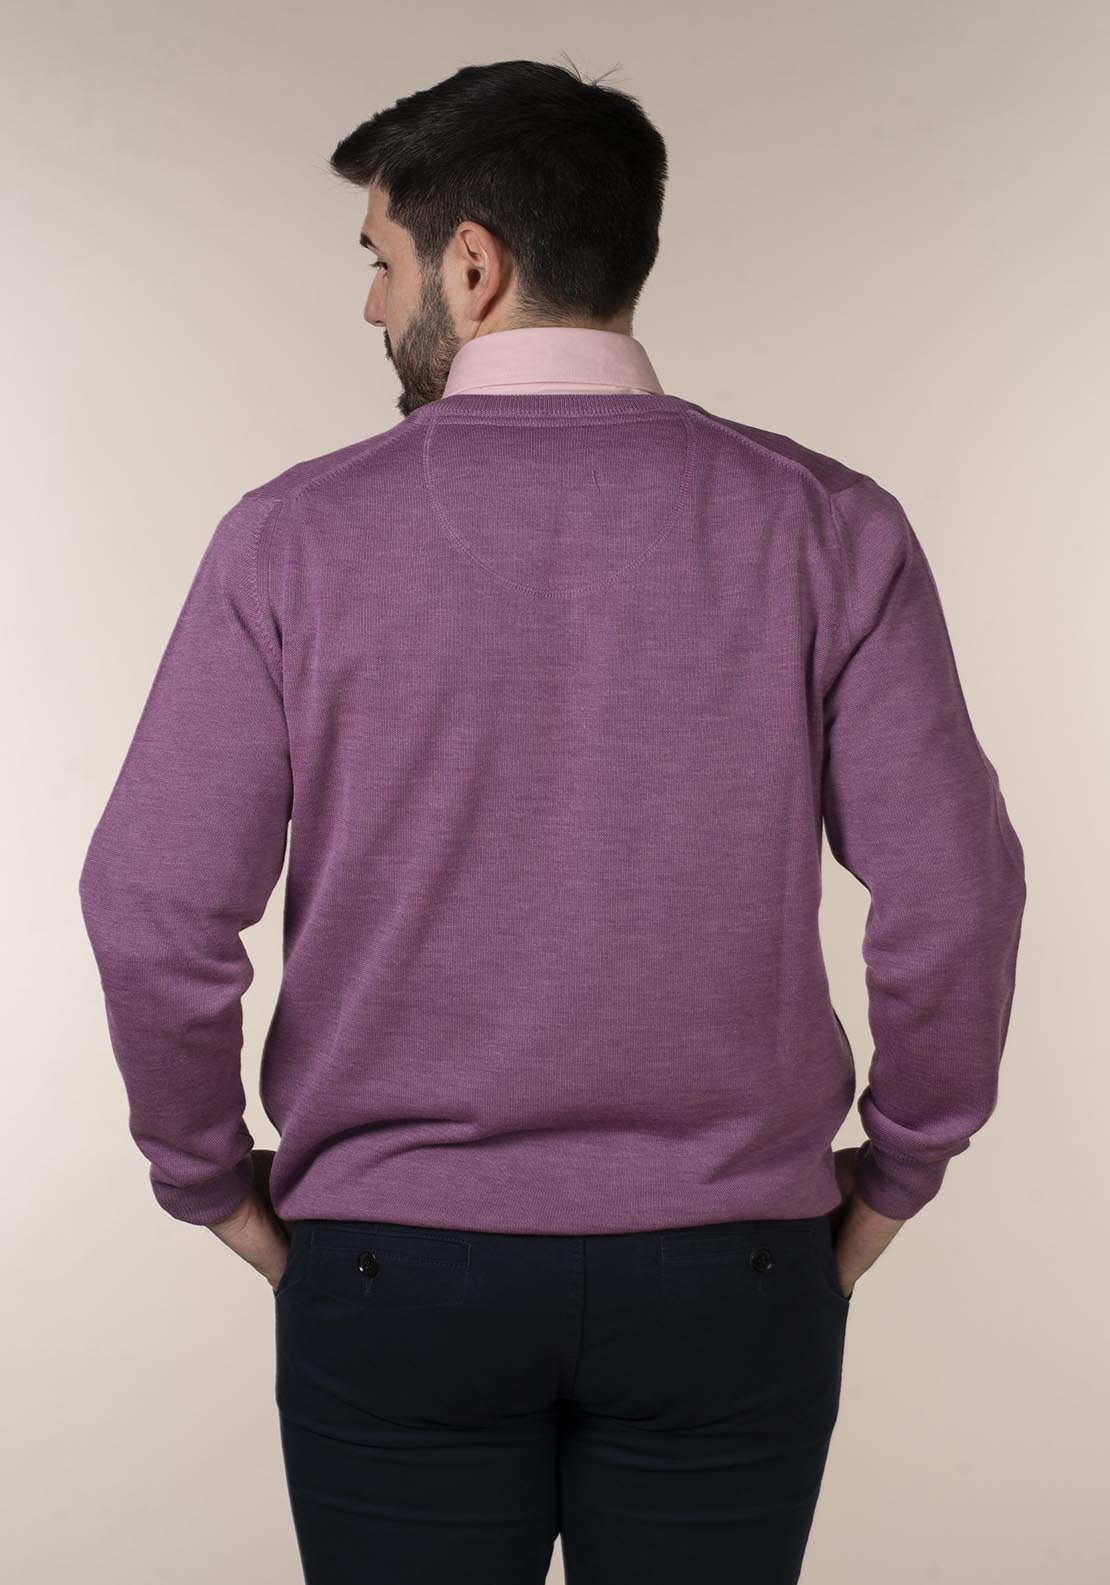 Yeats Mens 100% Cotton V-Neck Jumper 3 Shaws Department Stores